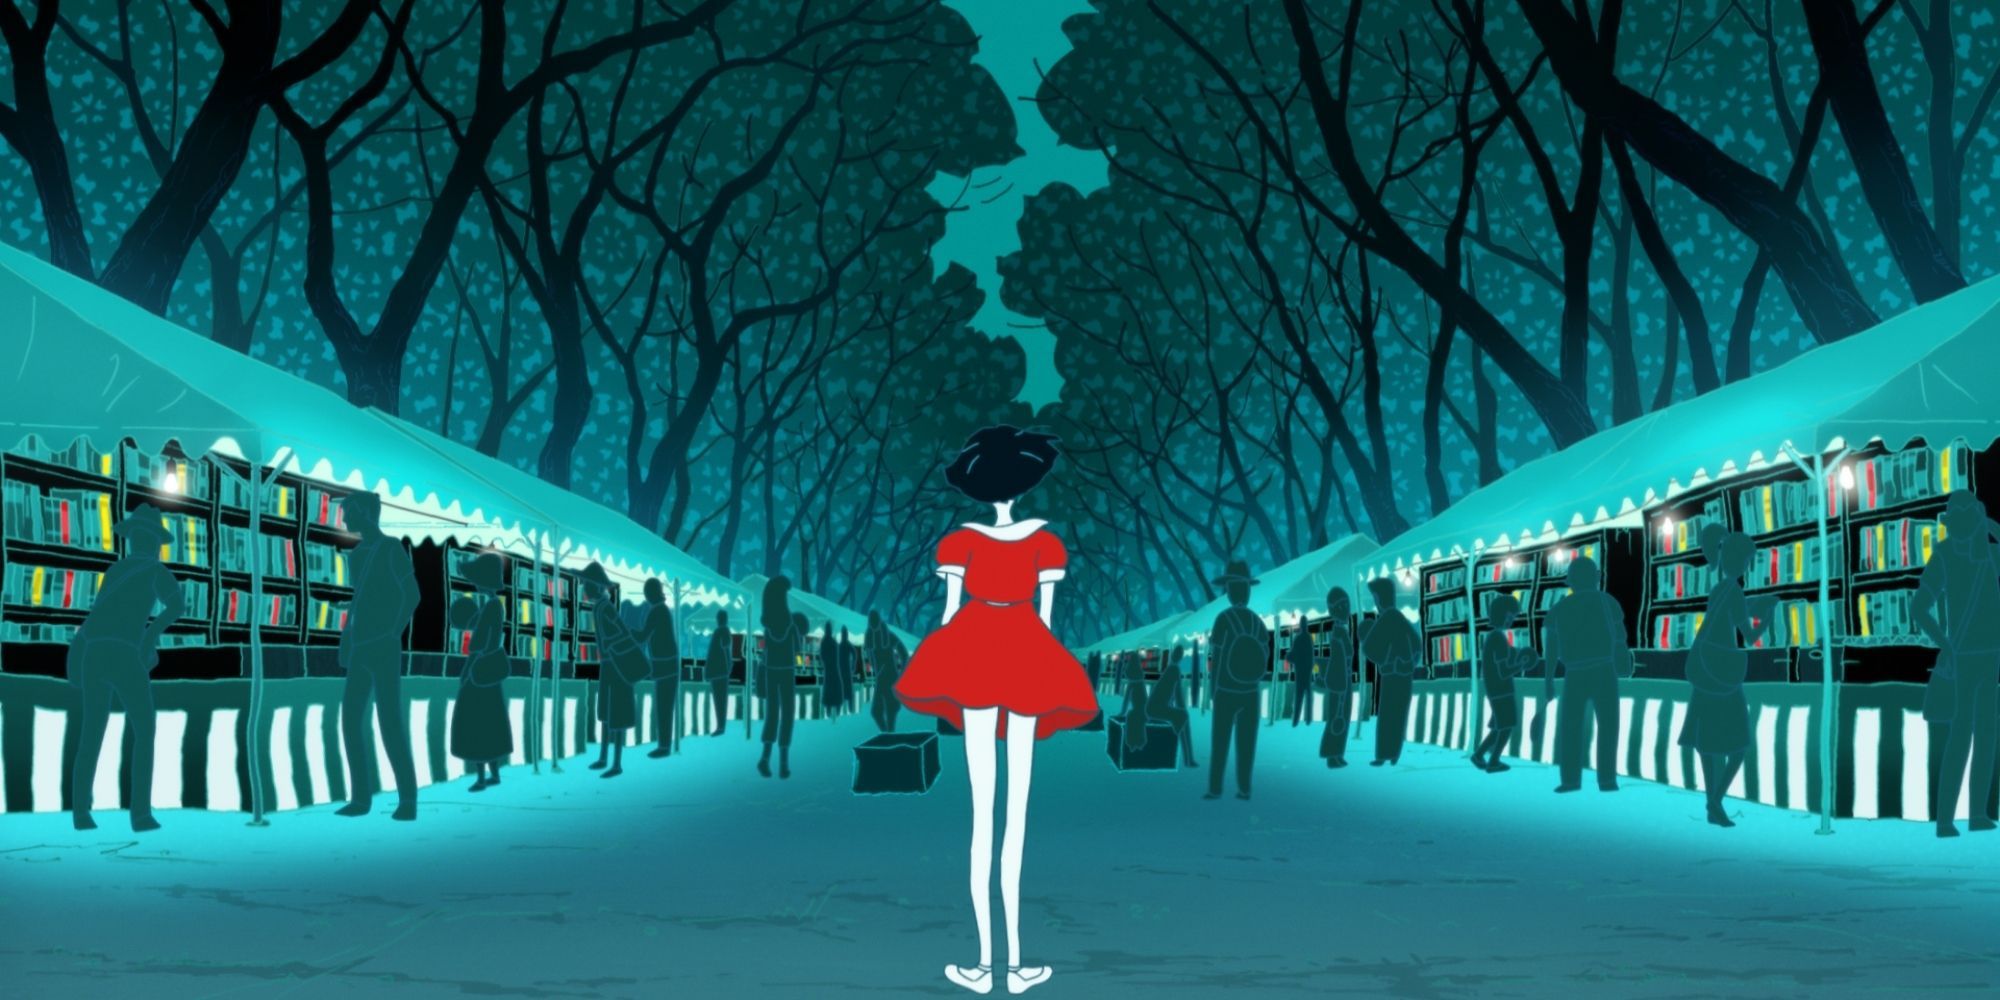 A girl in a red dress standing in the middle of a lan, with each side holding book stalls